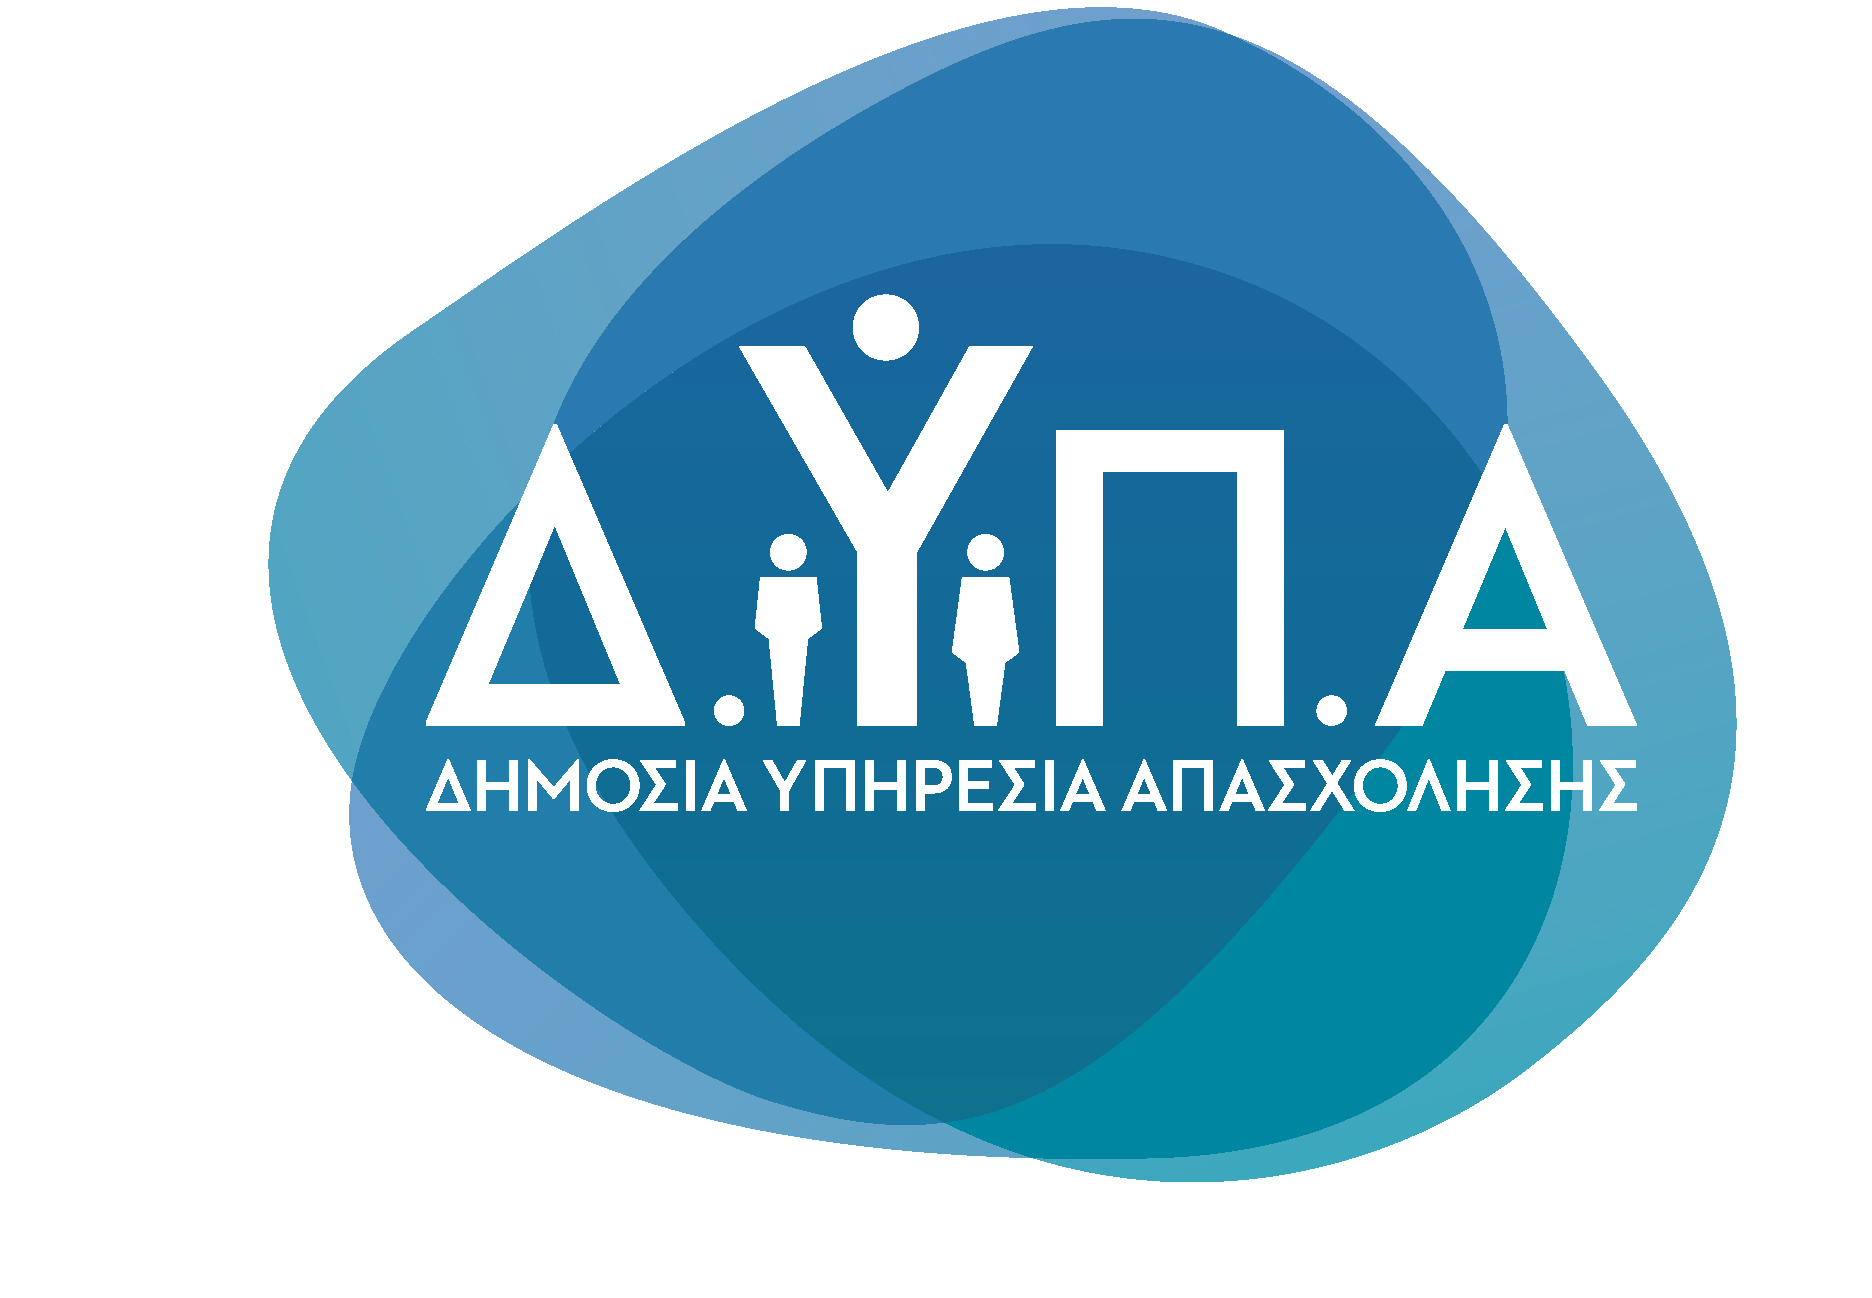 New project for 1,000 new jobs in East Macedonia and Thrace region – applications from Monday